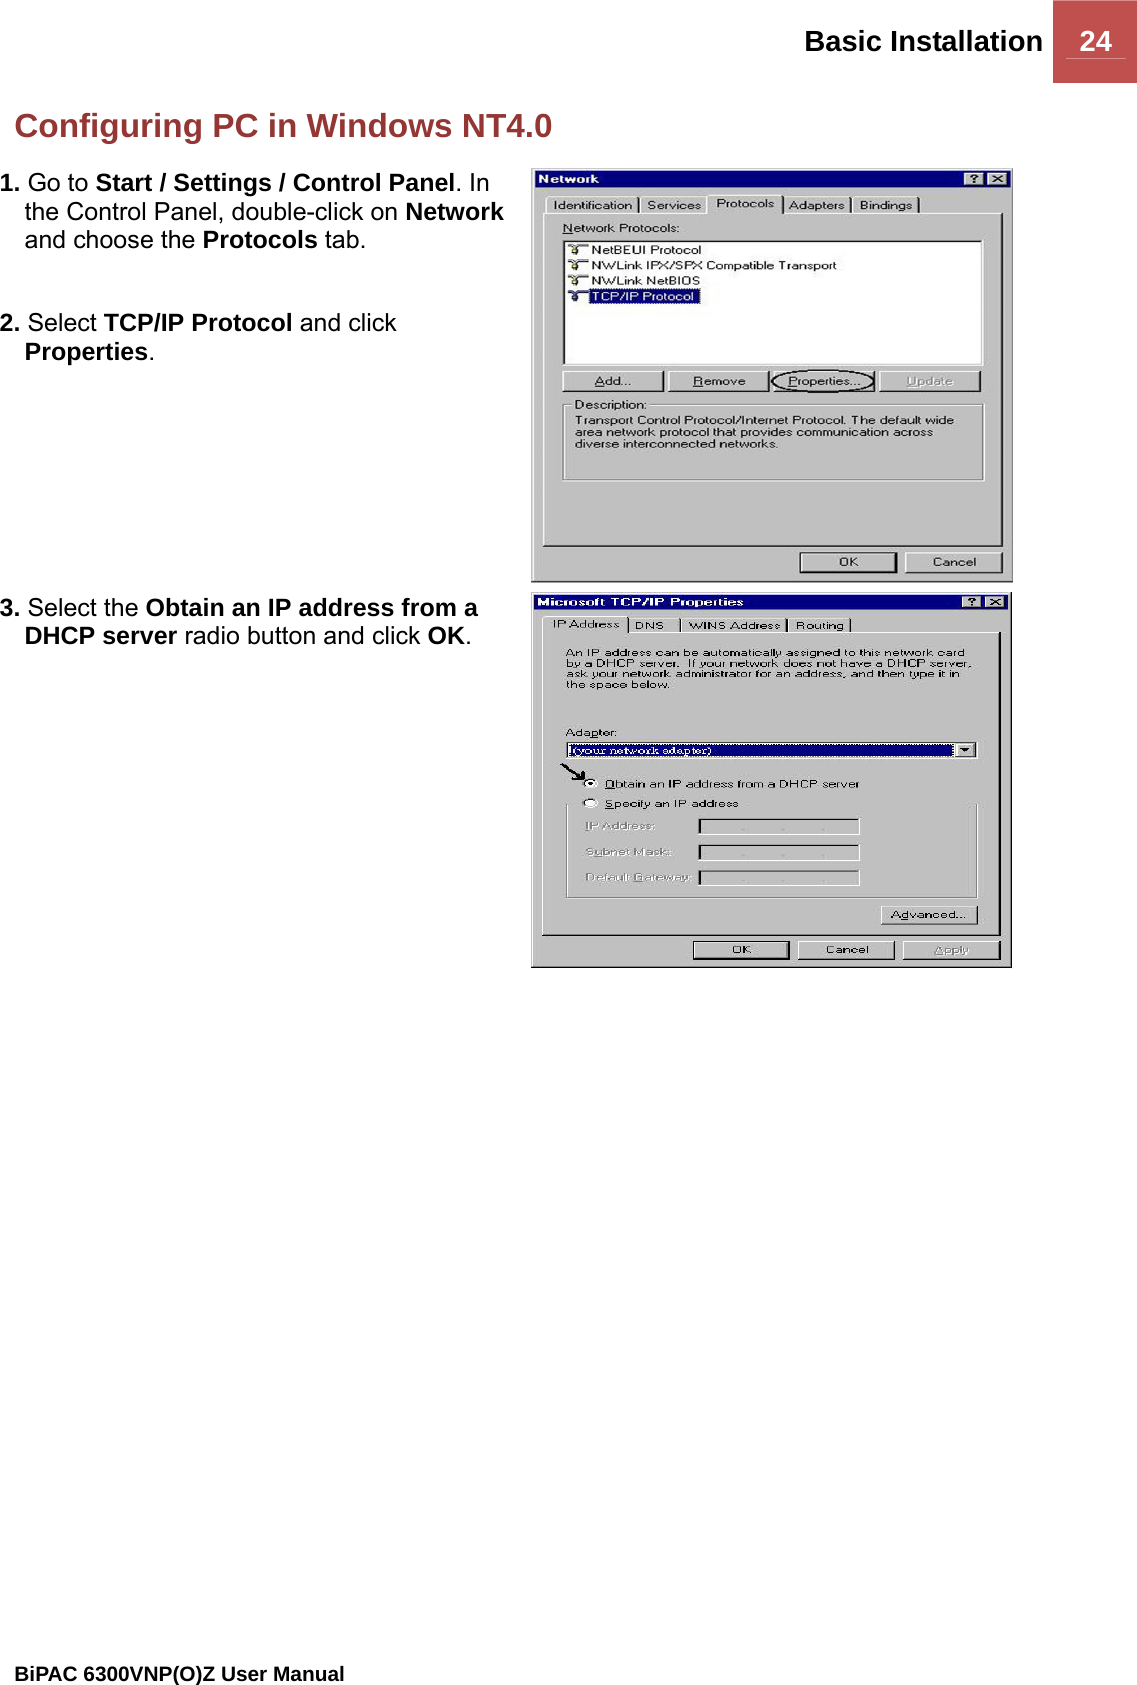 Basic Installation 24                                                BiPAC 6300VNP(O)Z User Manual  Configuring PC in Windows NT4.0 1. Go to Start / Settings / Control Panel. In the Control Panel, double-click on Network and choose the Protocols tab.  2. Select TCP/IP Protocol and click Properties.  3. Select the Obtain an IP address from a DHCP server radio button and click OK.  